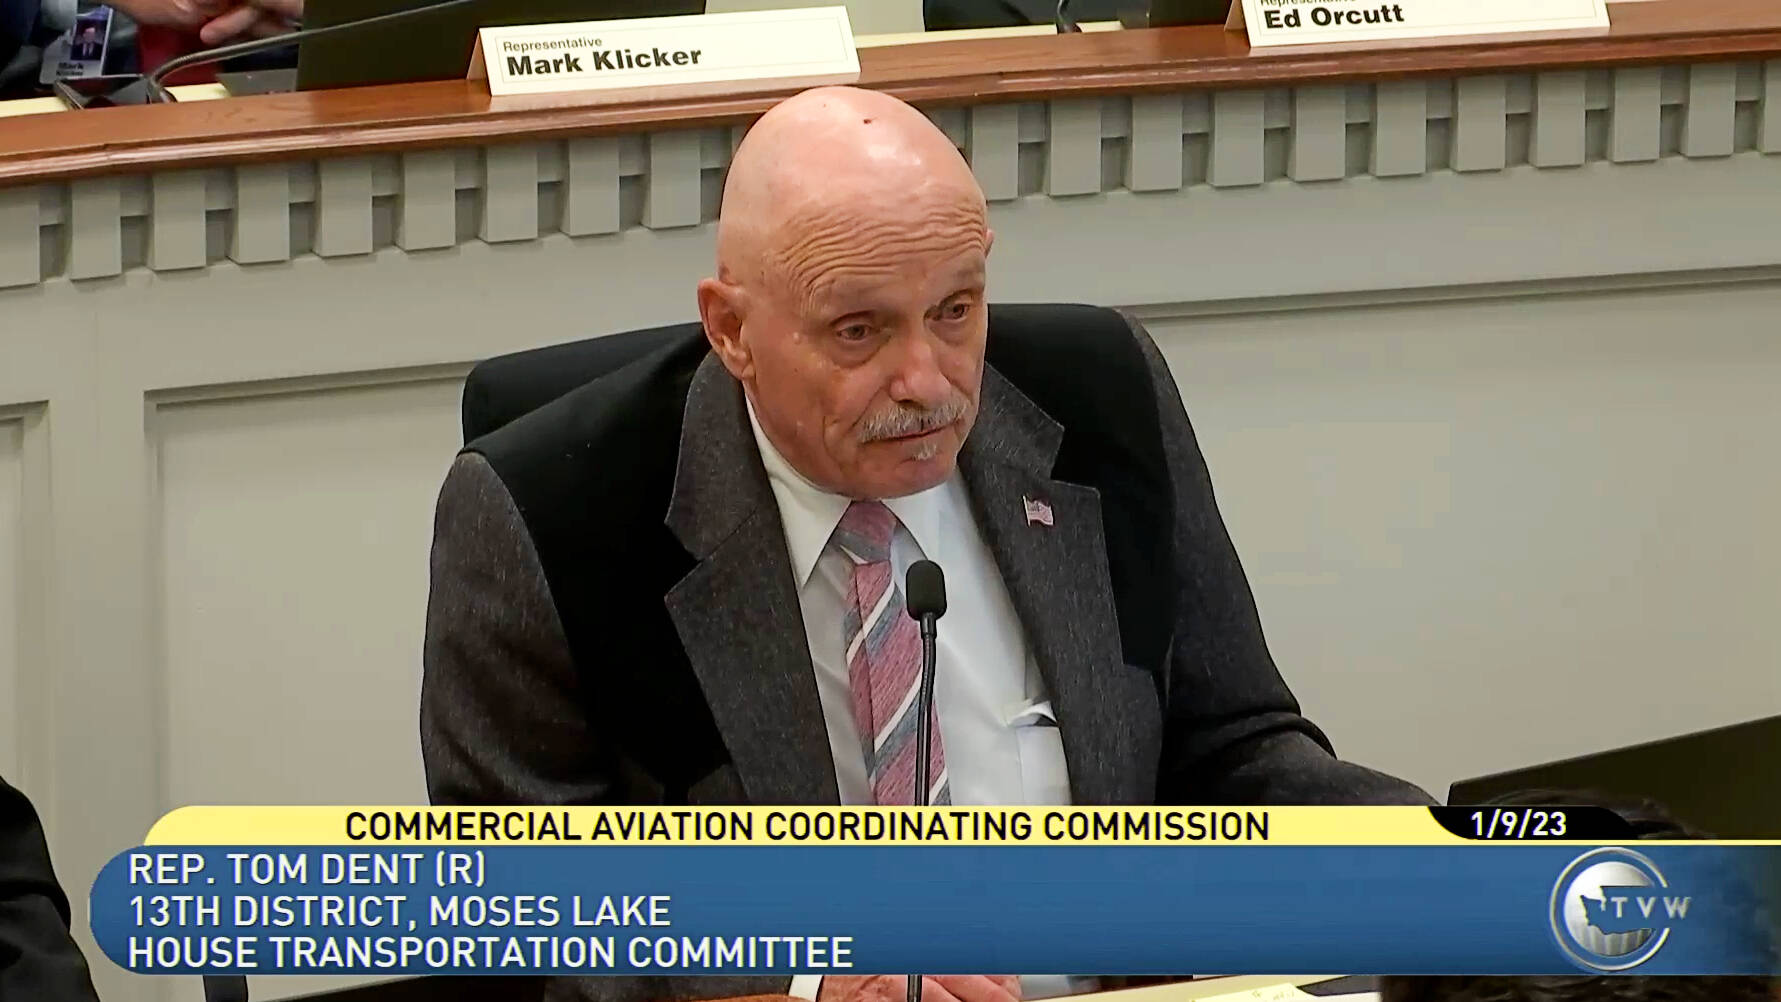 In this screenshot of a TVW recording, Washington State representative Tom Dent (R - Moses Lake) speaks during a conversation about the Commercial Aviation Coordinating Commission (CACC) during a Jan. 9 meeting of the House Transportation Committee.